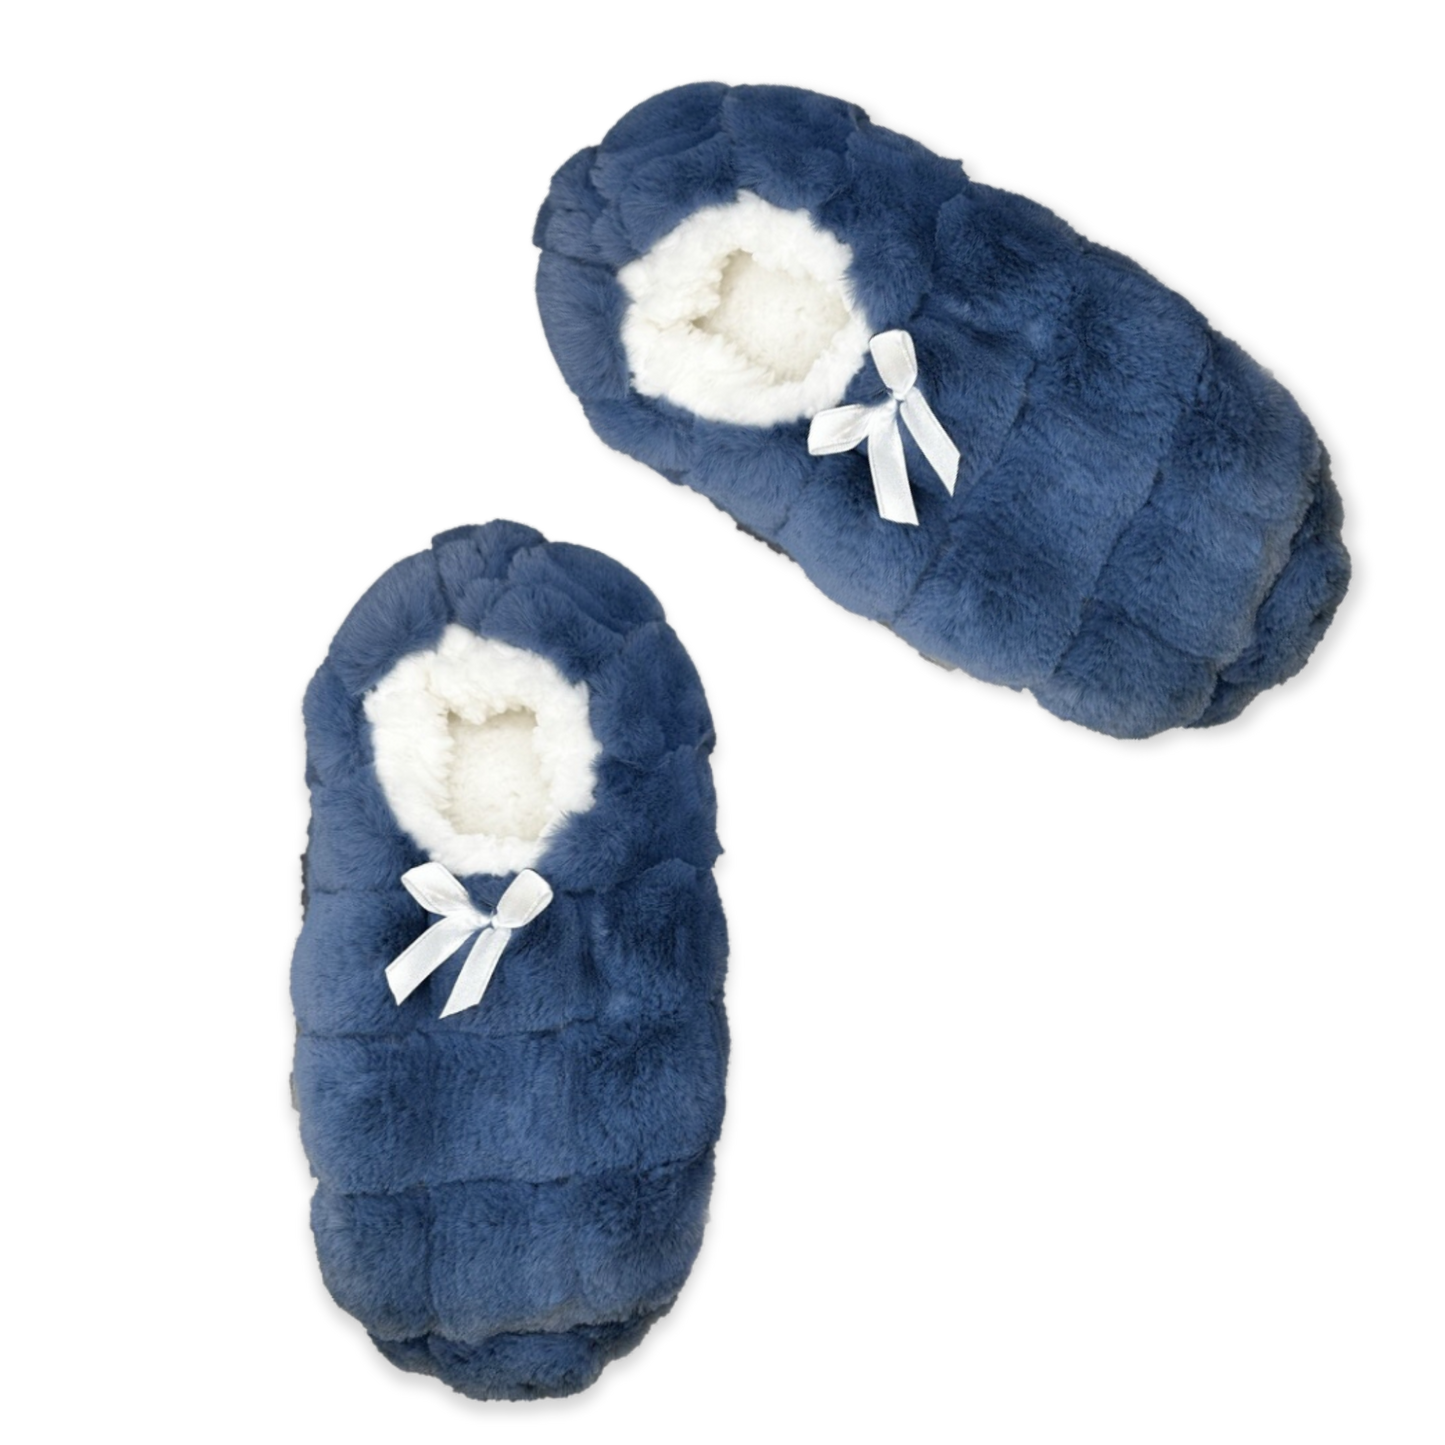 Blue slippers with a white bow